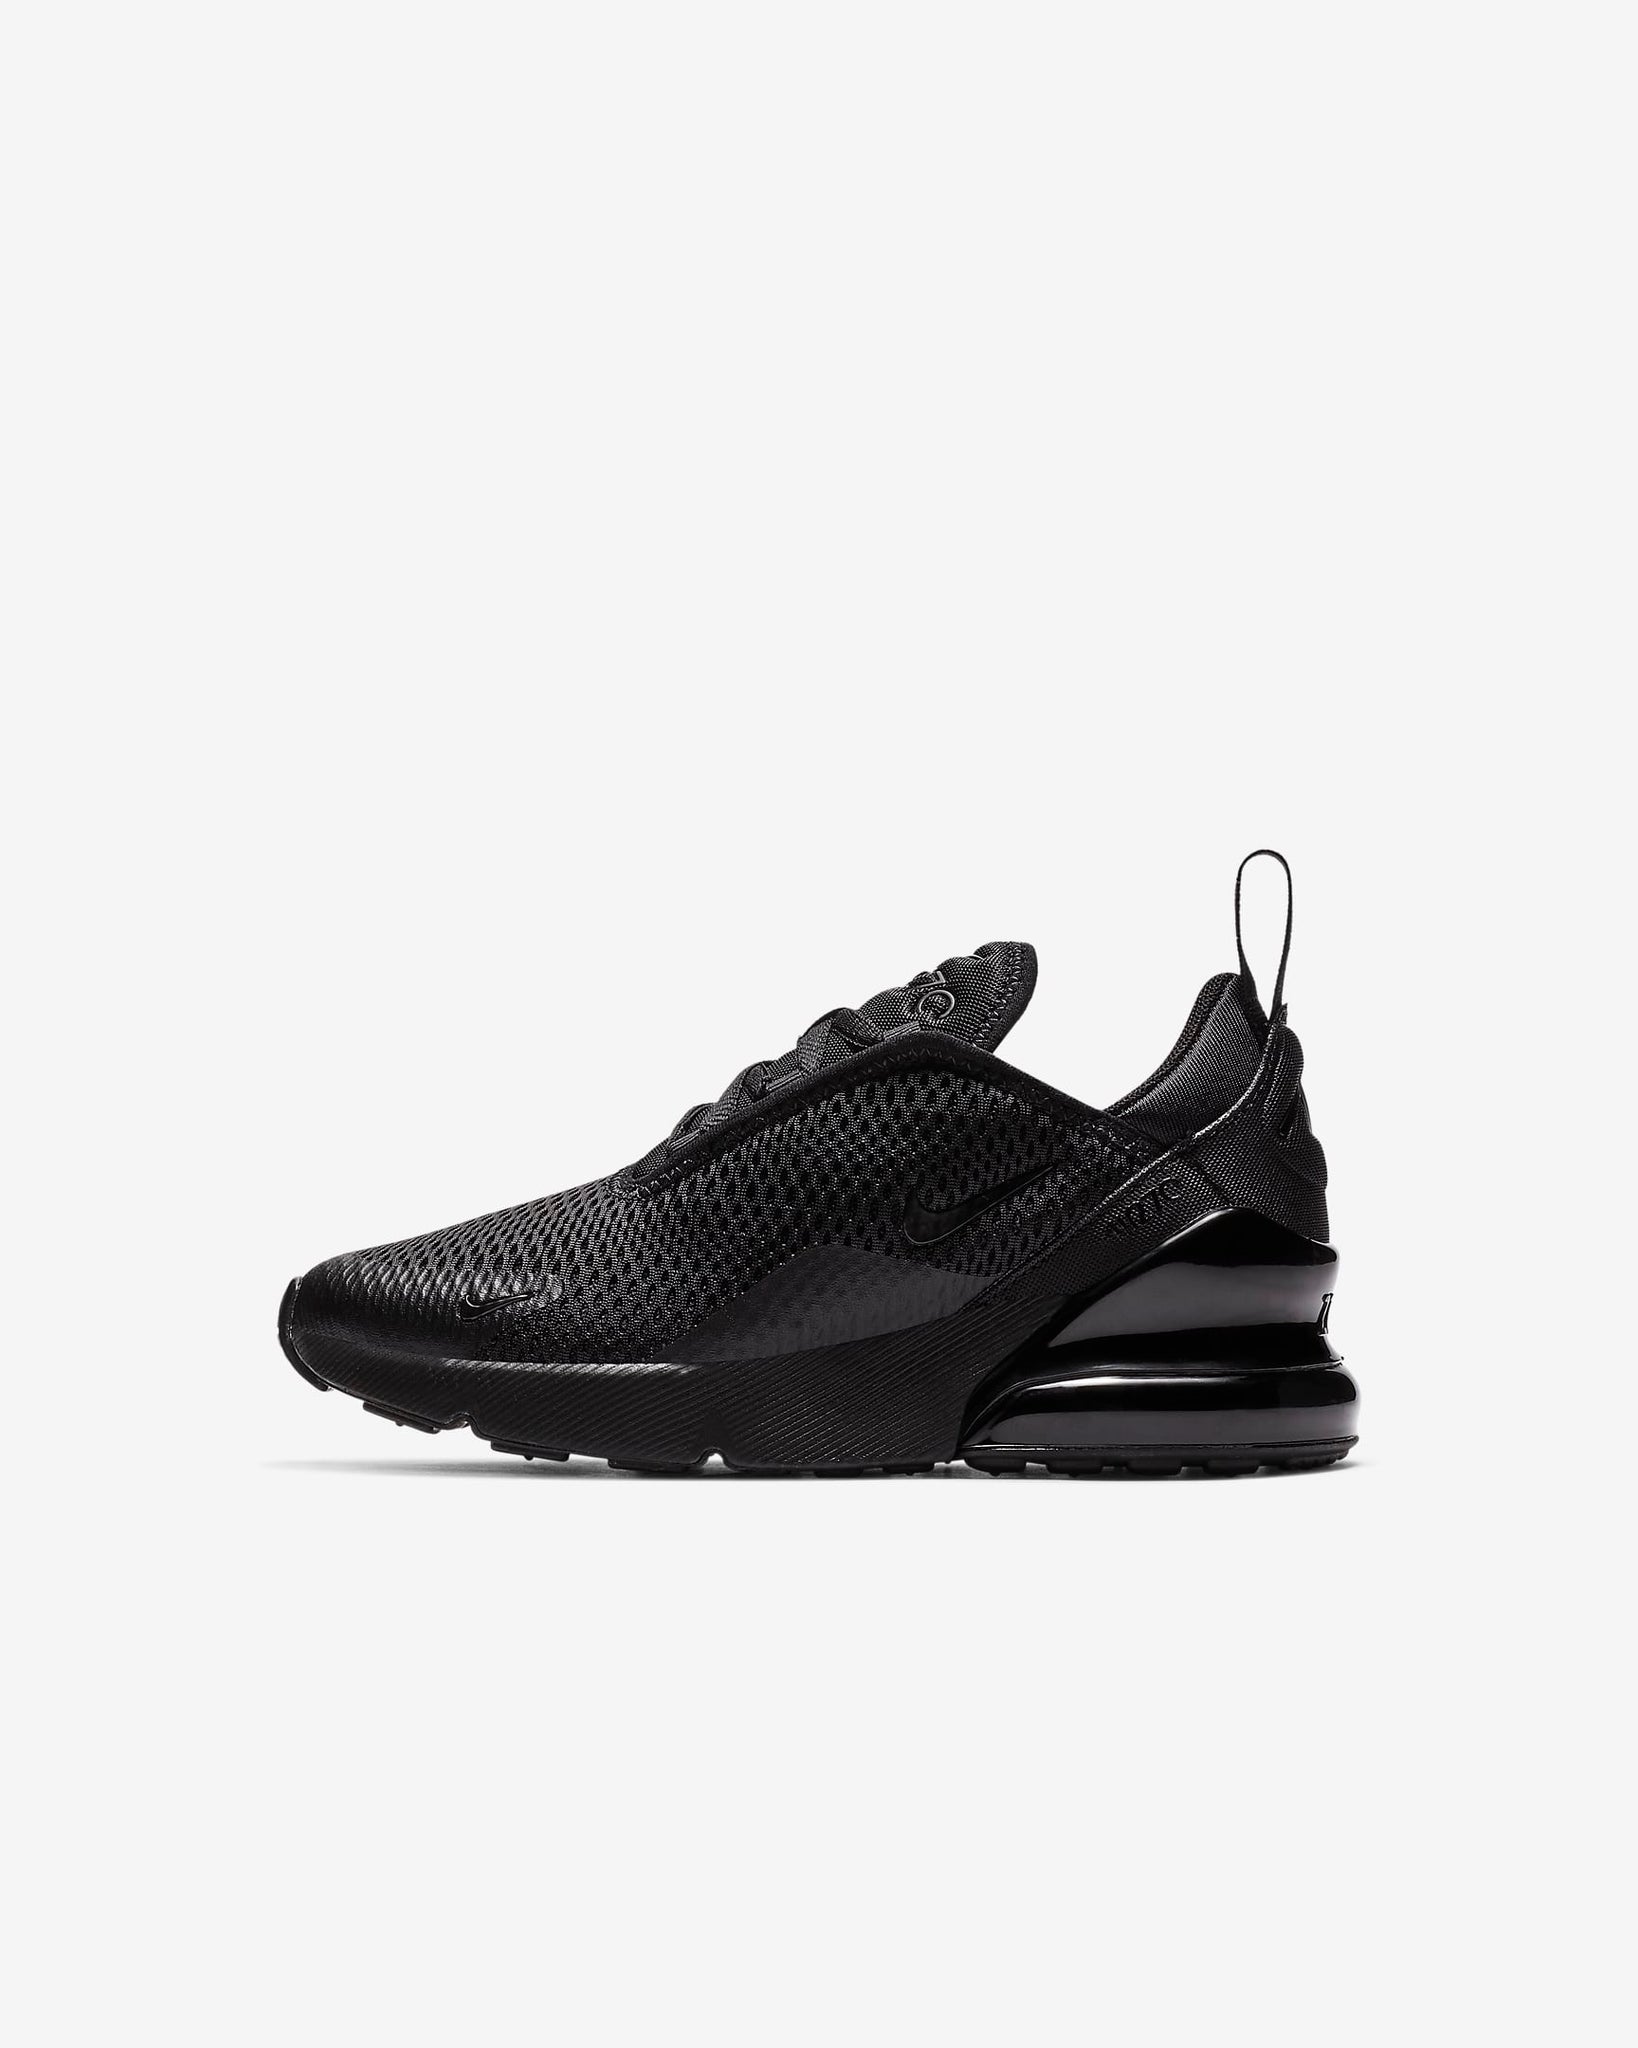 Nike Air Max 270 negro completo PS